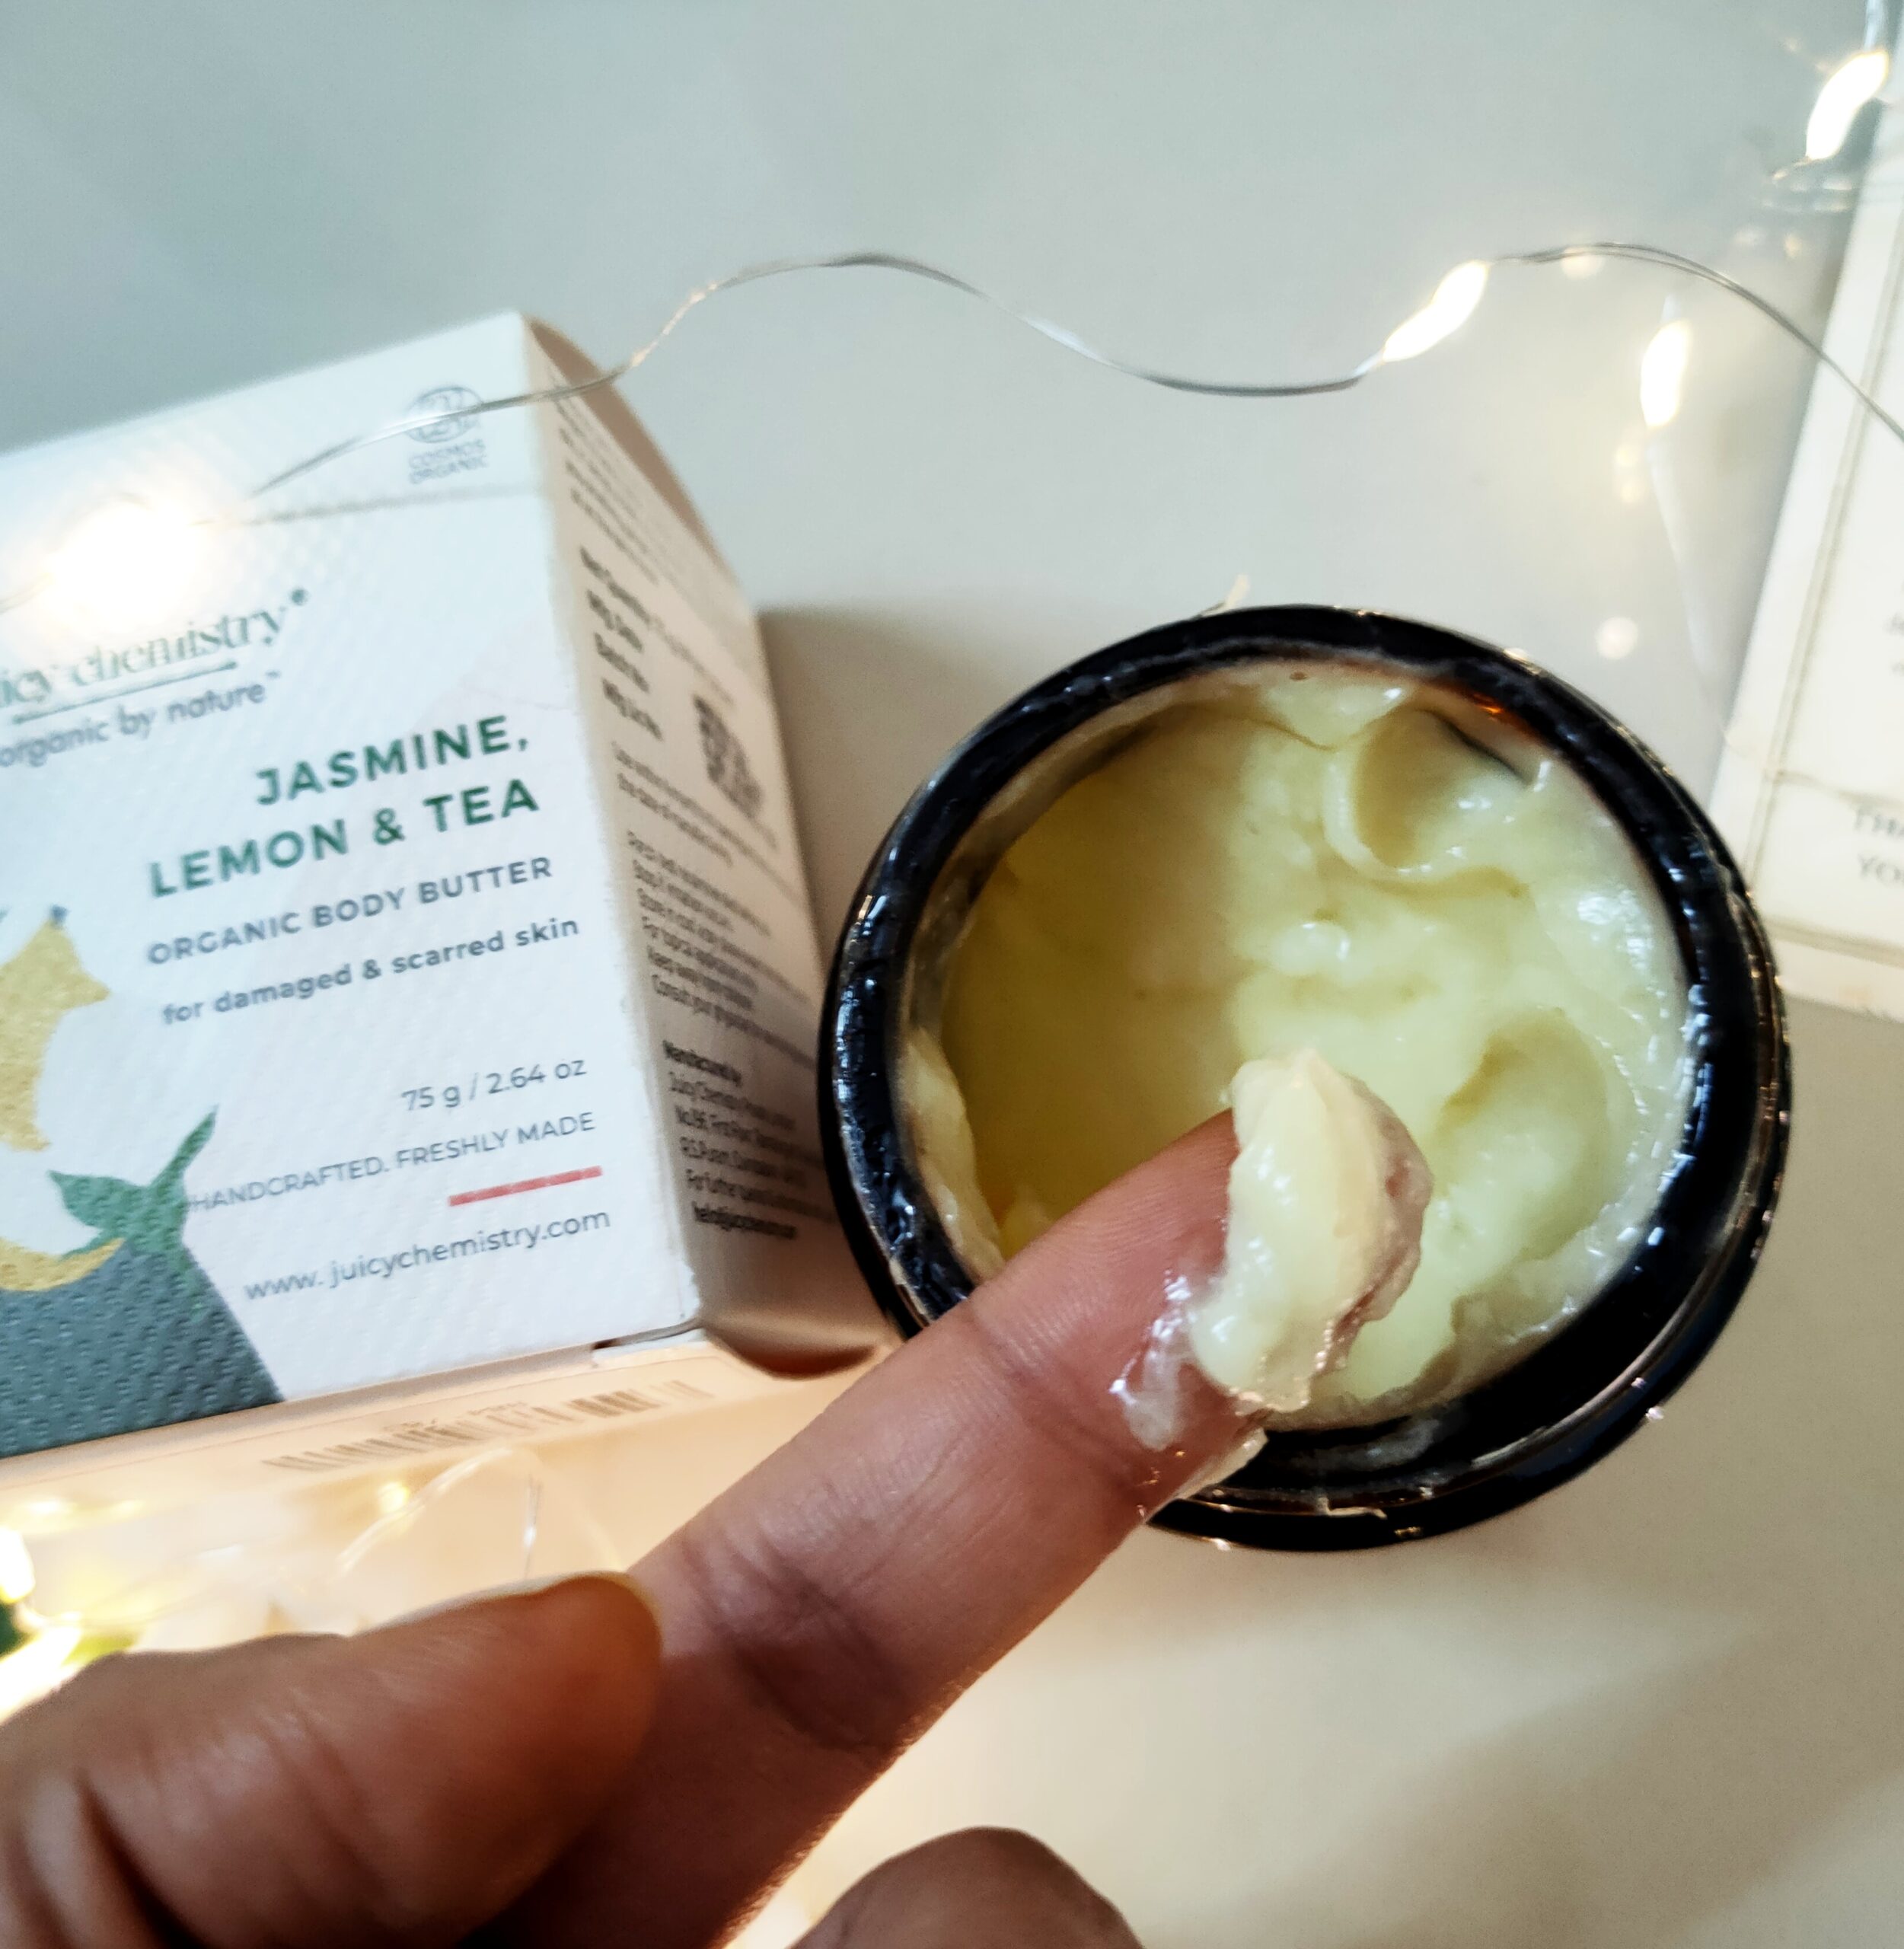 We Tried Juicy Chemistry Organic and Natural Products, and Honestly, Wow